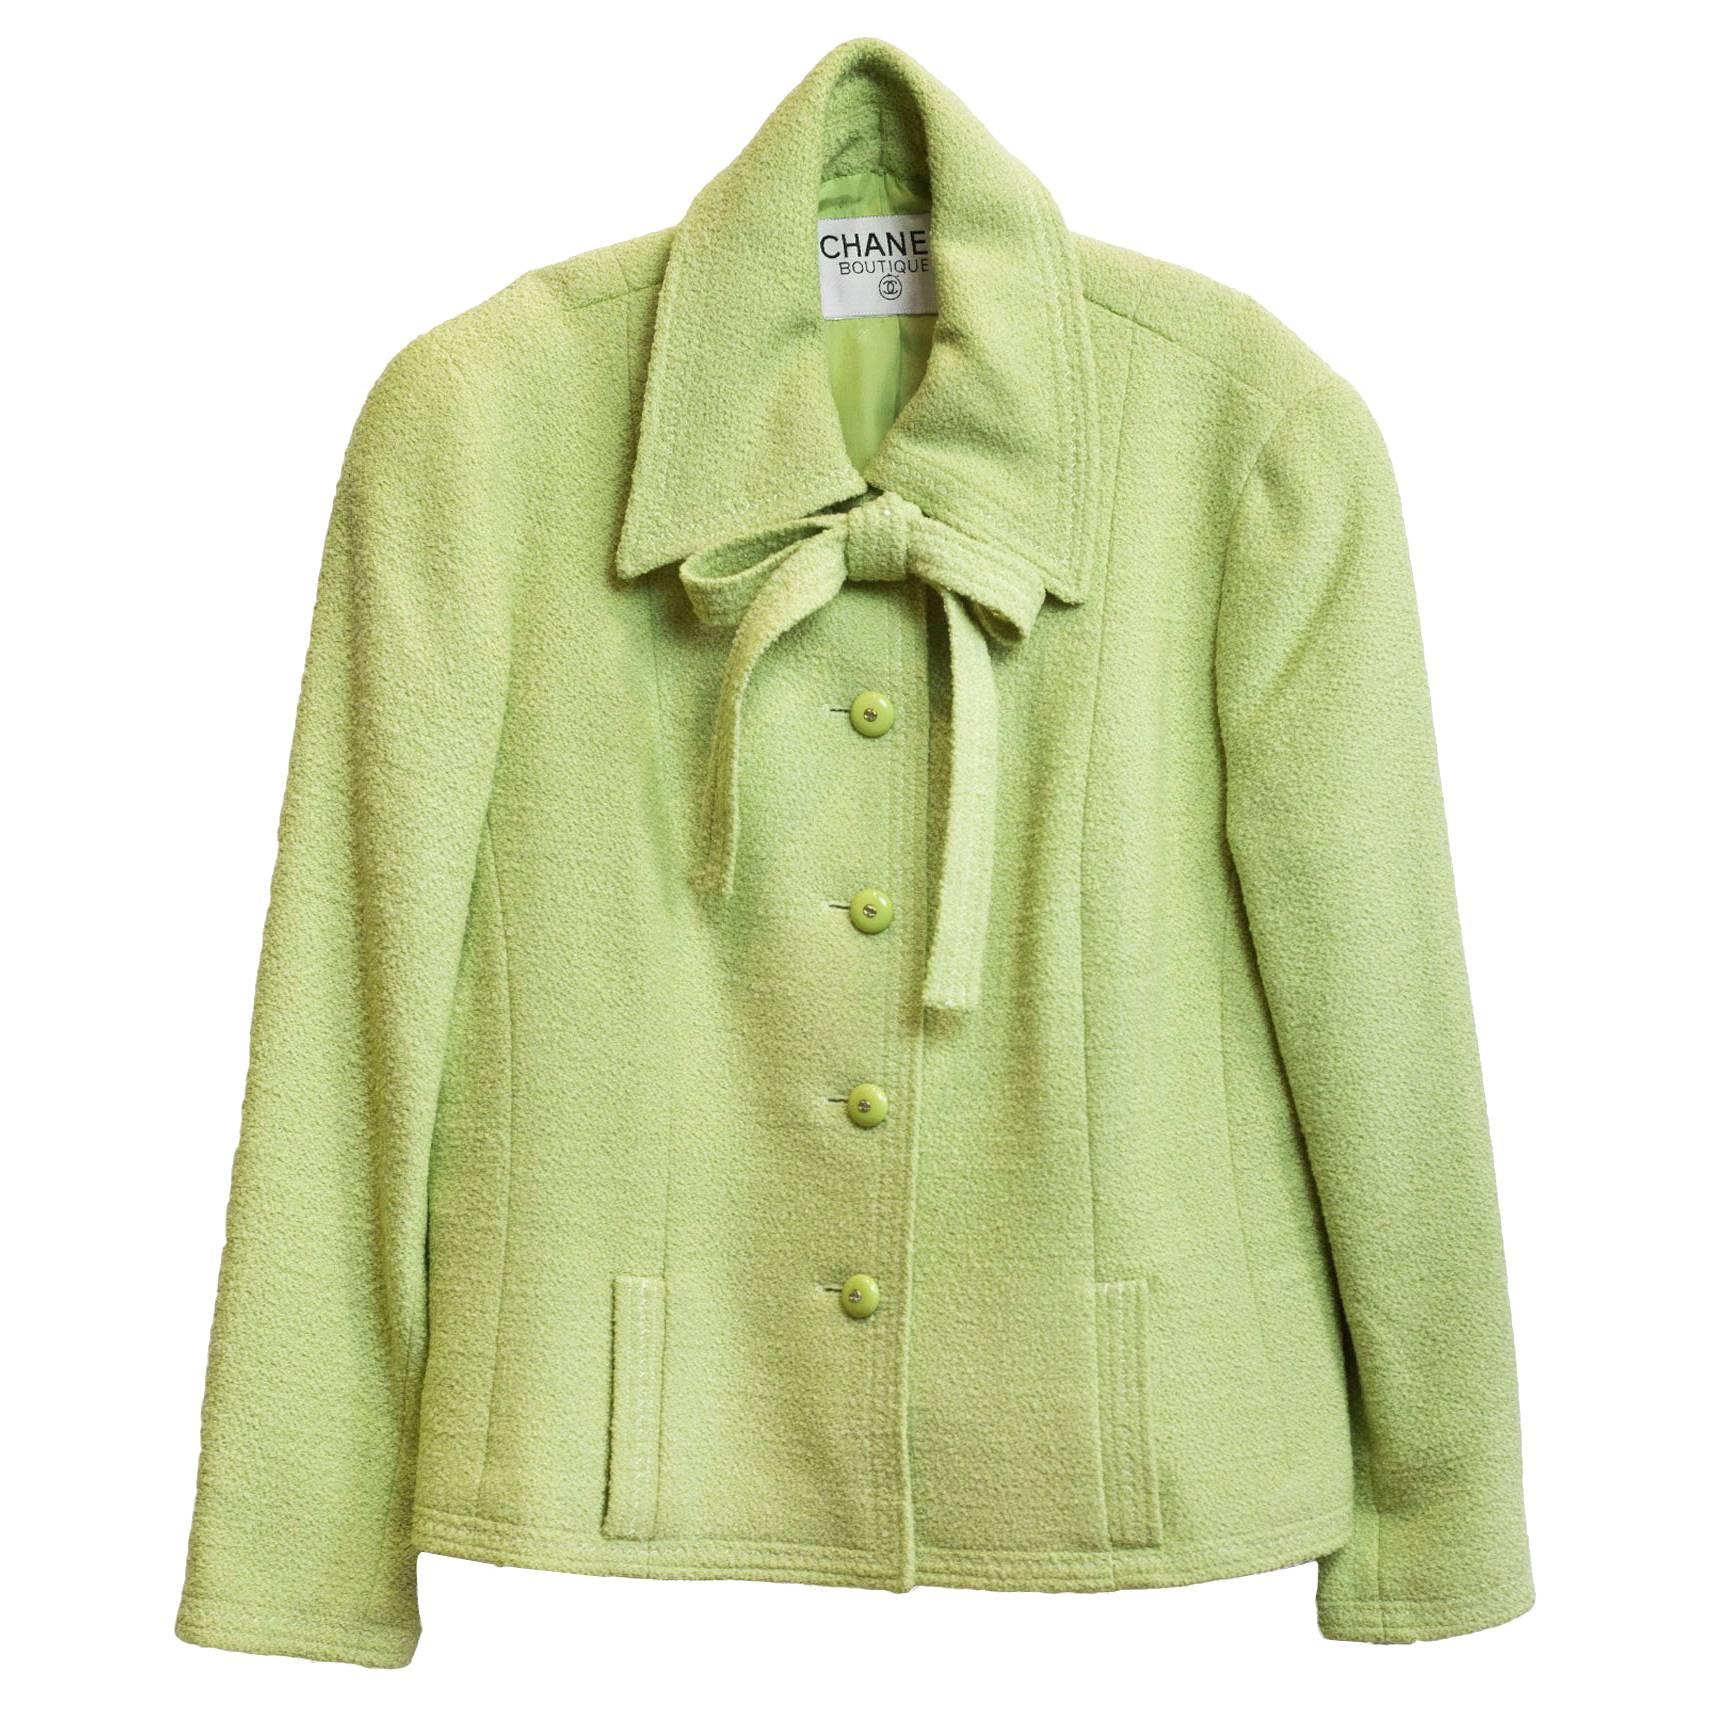 Chanel Chartreuse Boucle Button-Up Jacket w/ Neck Tie